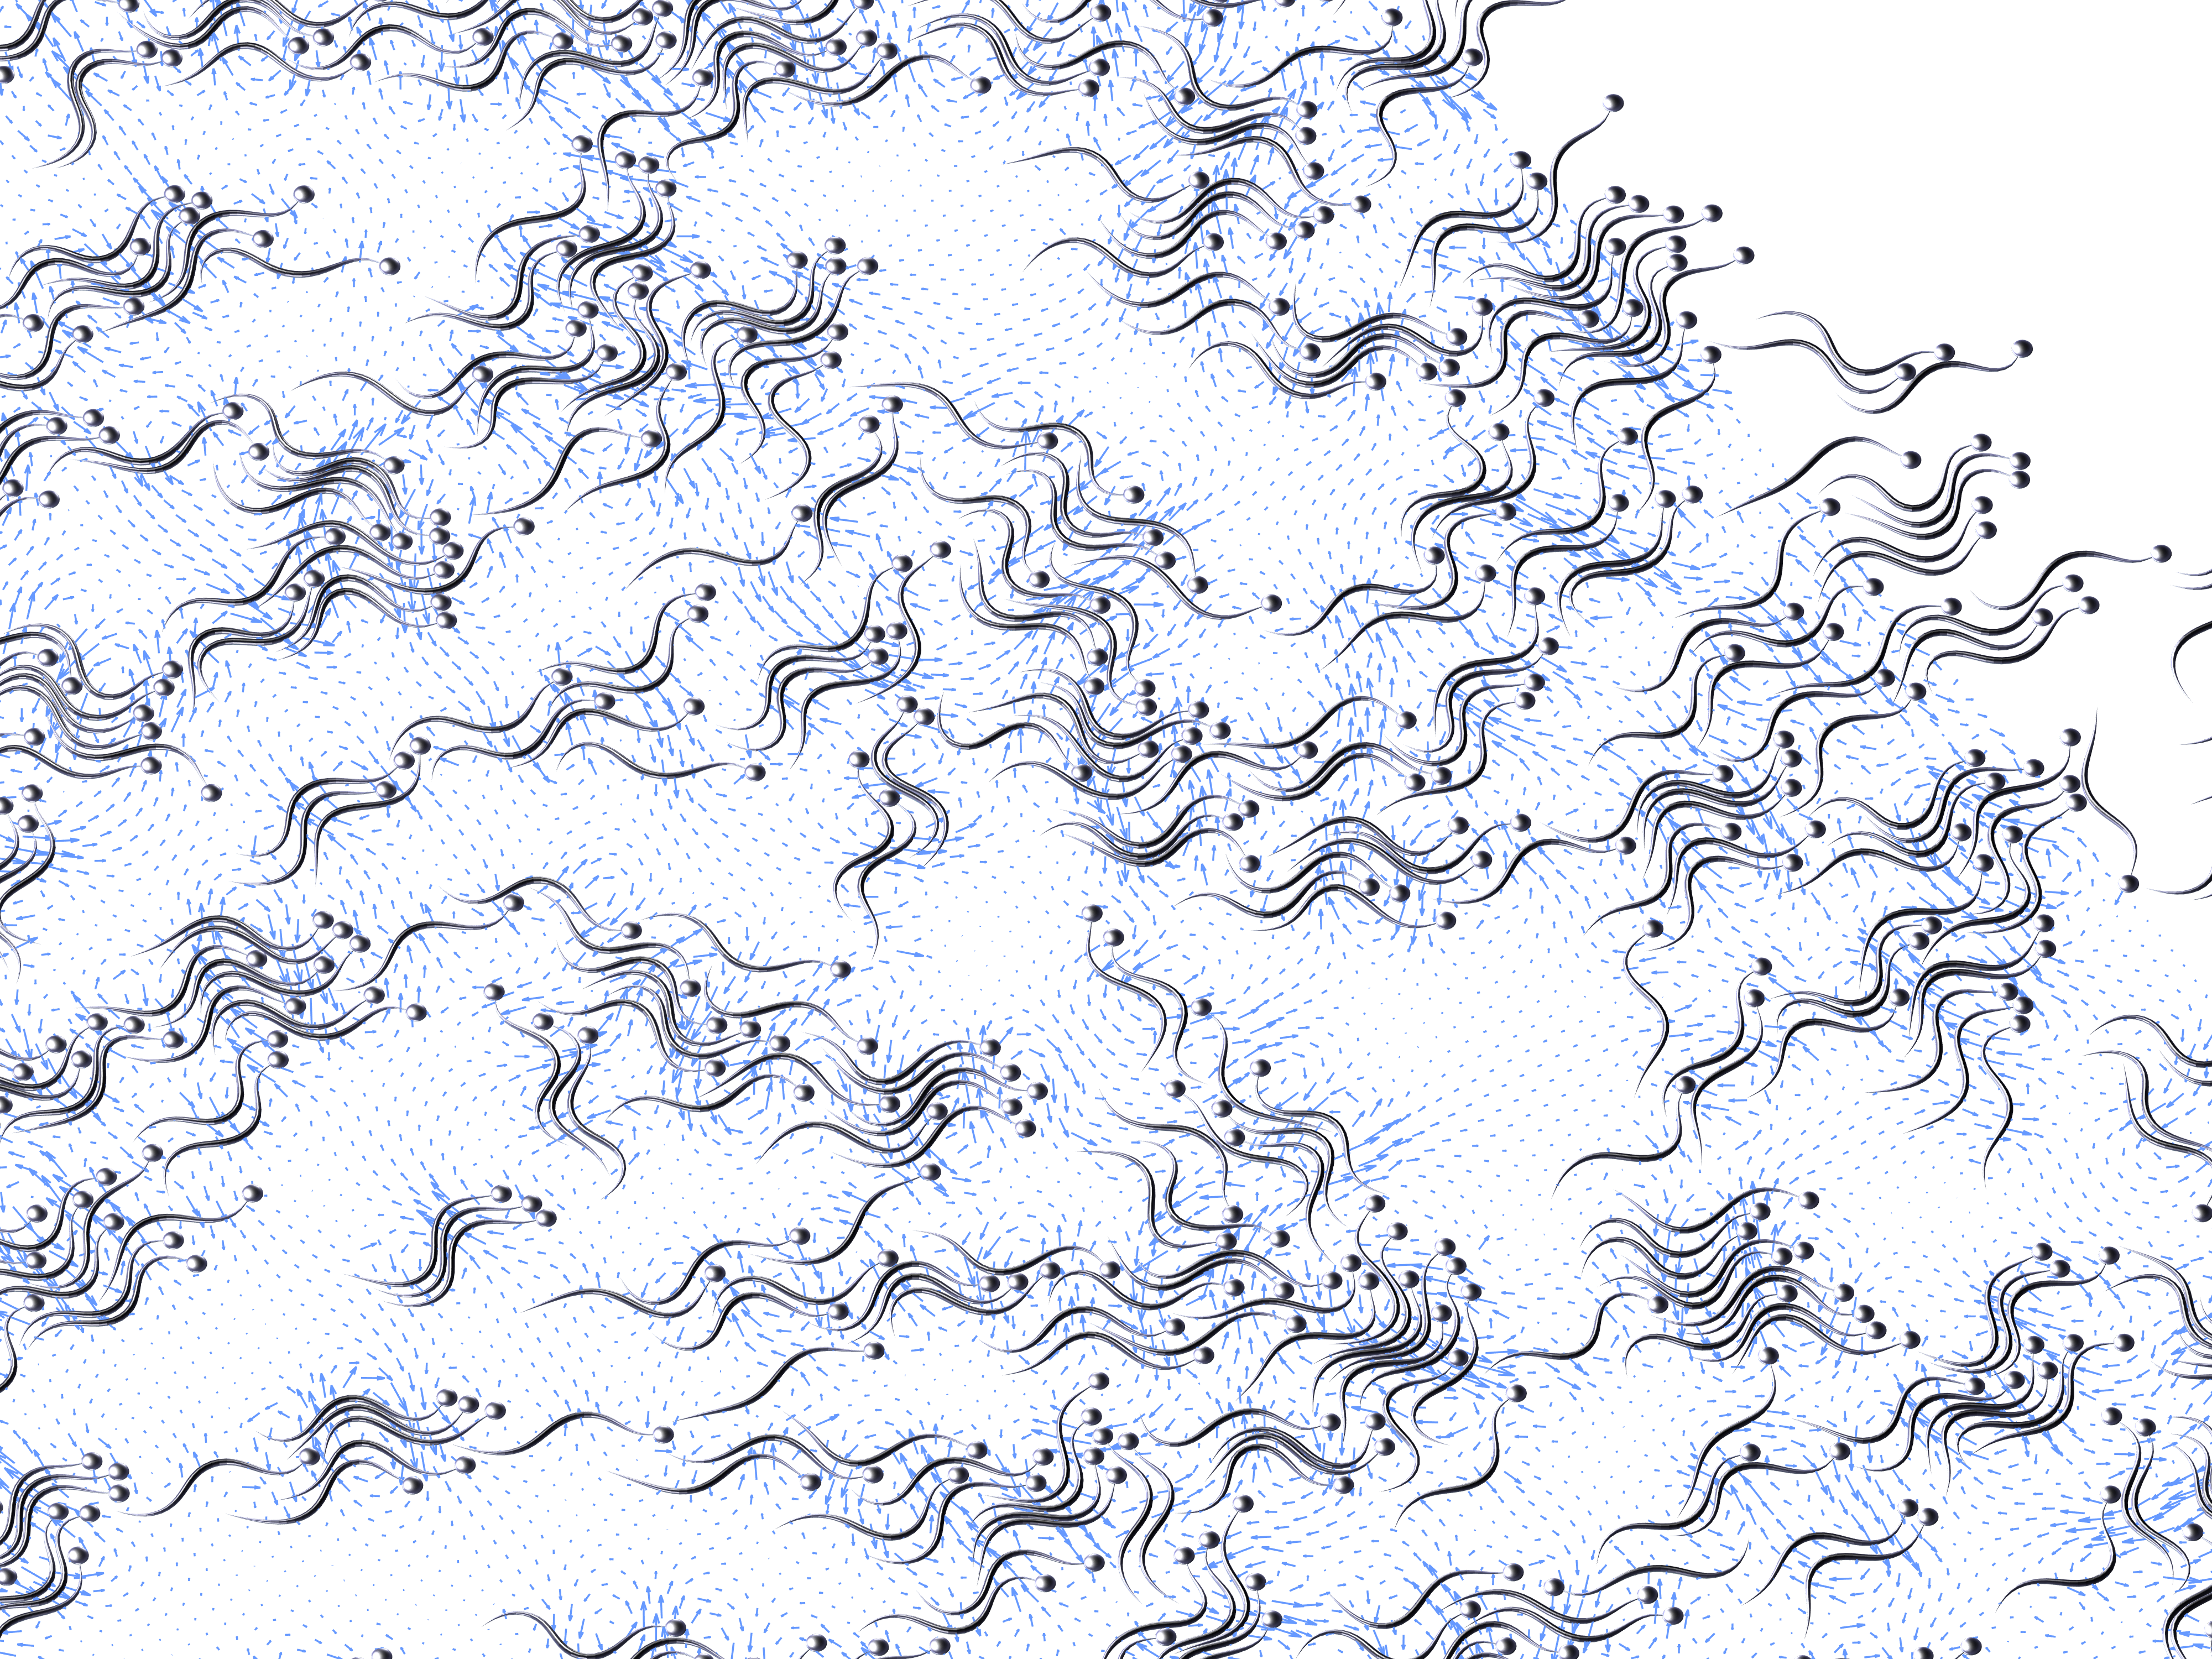 A computer generated image of model sperm cells suspended in a Stokesian fluid, including the fluid velocity field. All sperm cells swim in the same plane and interact hydrodynamically, leading to visible cluster formation and locally enhanced flows.